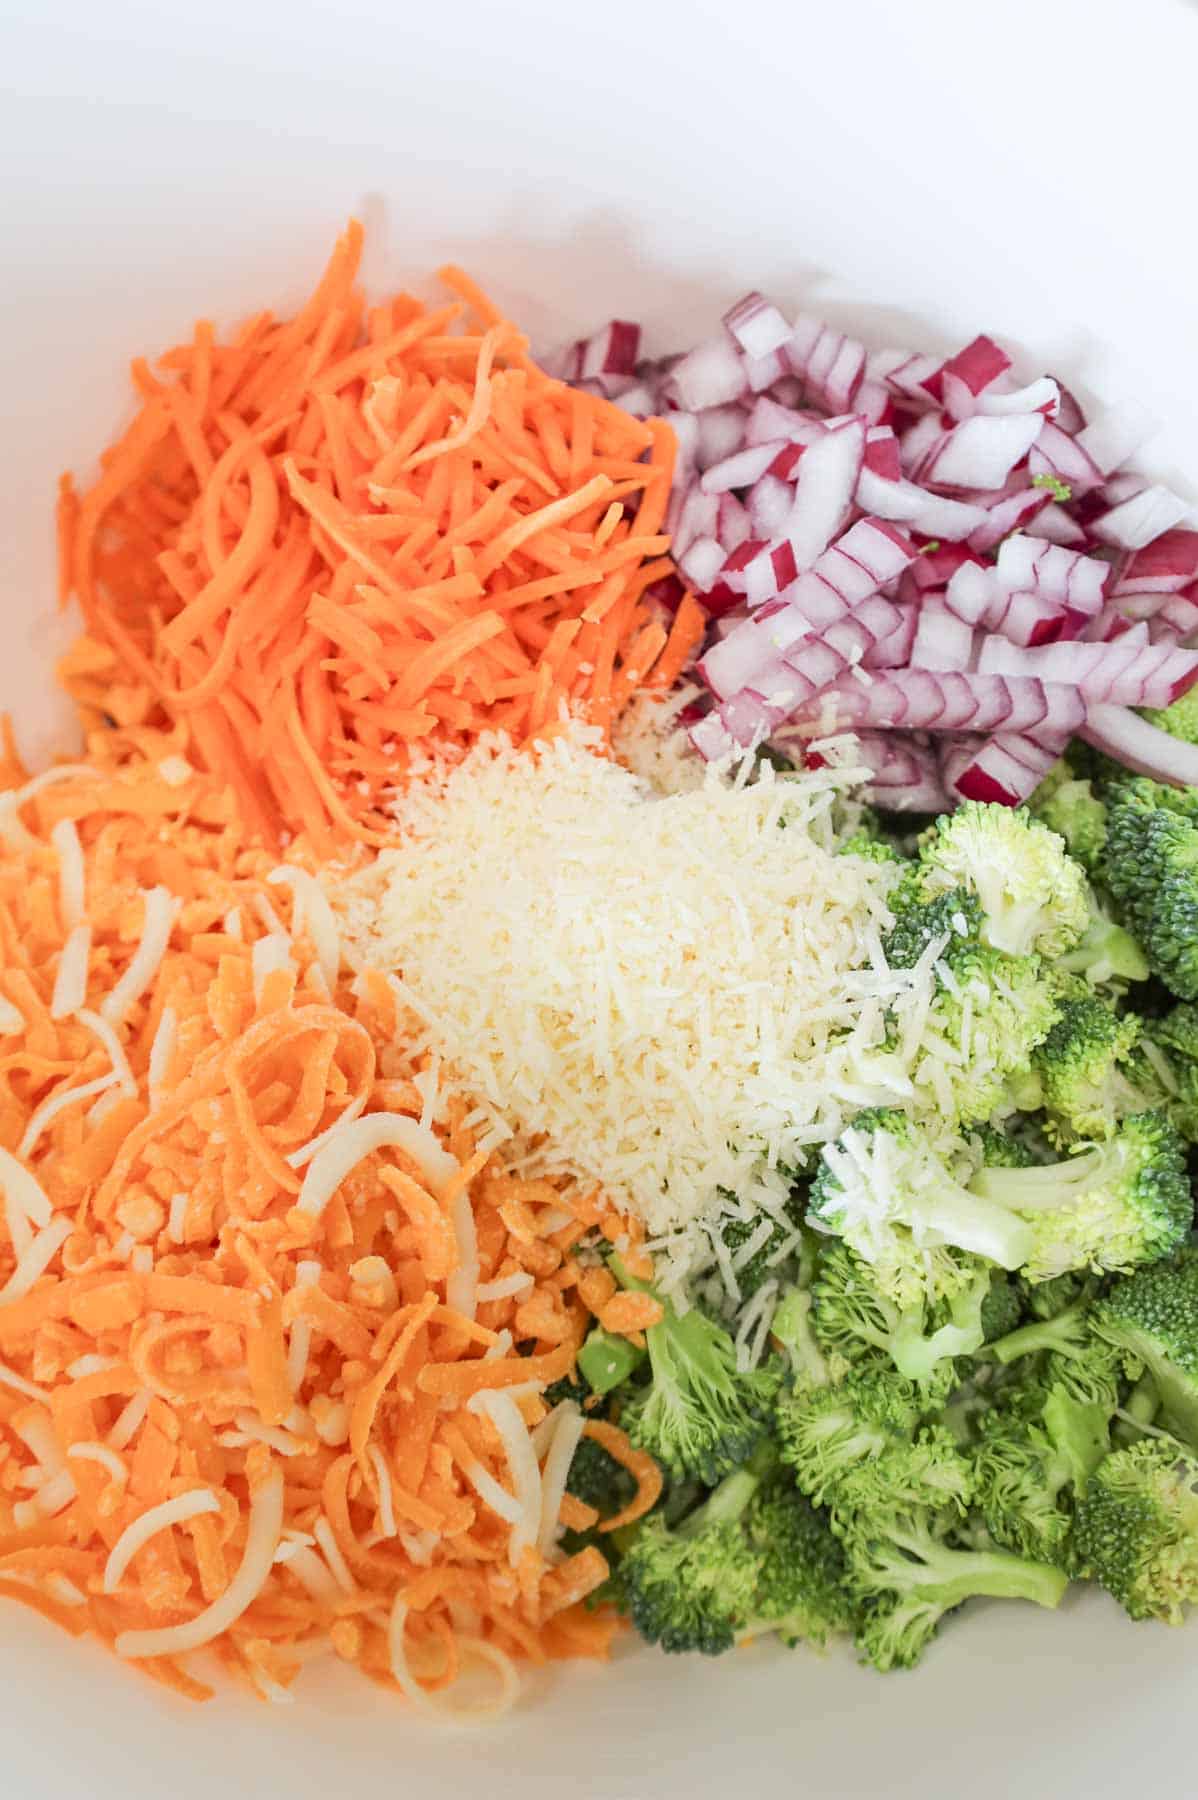 shredded cheese, diced red onions, shredded carrots and chopped broccoli florets in a mixing bowl